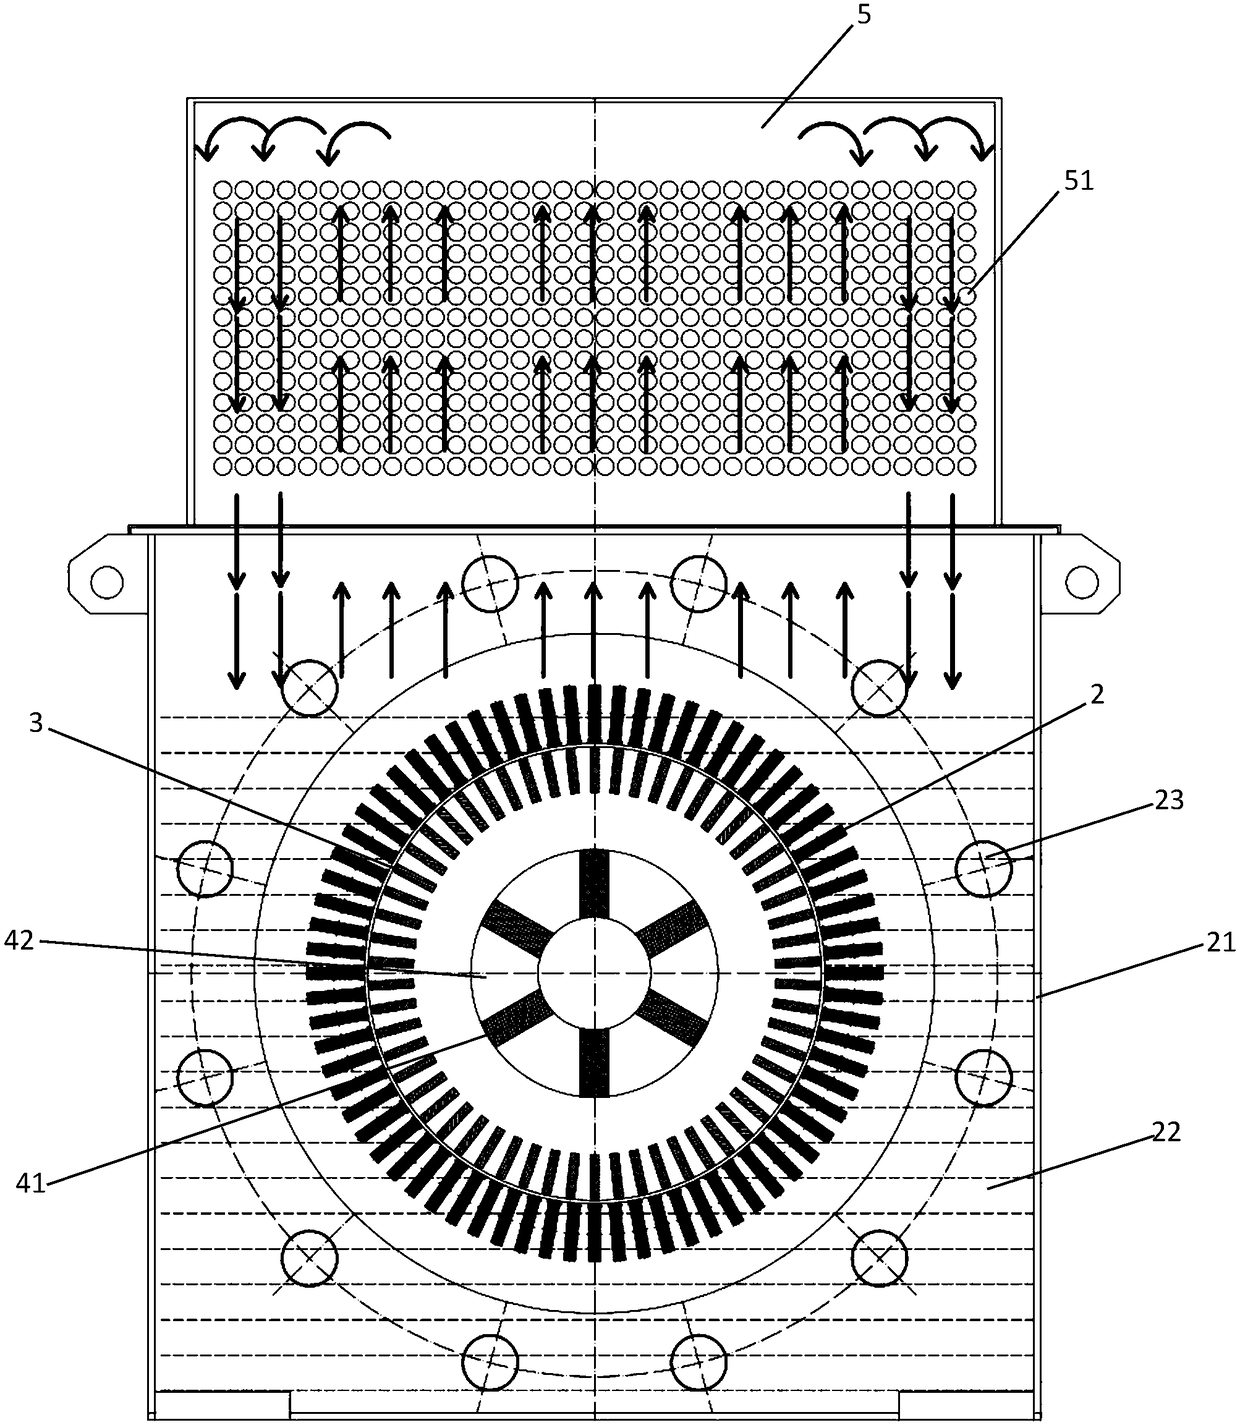 Motor self-driven cooling structure based on cooling liquid